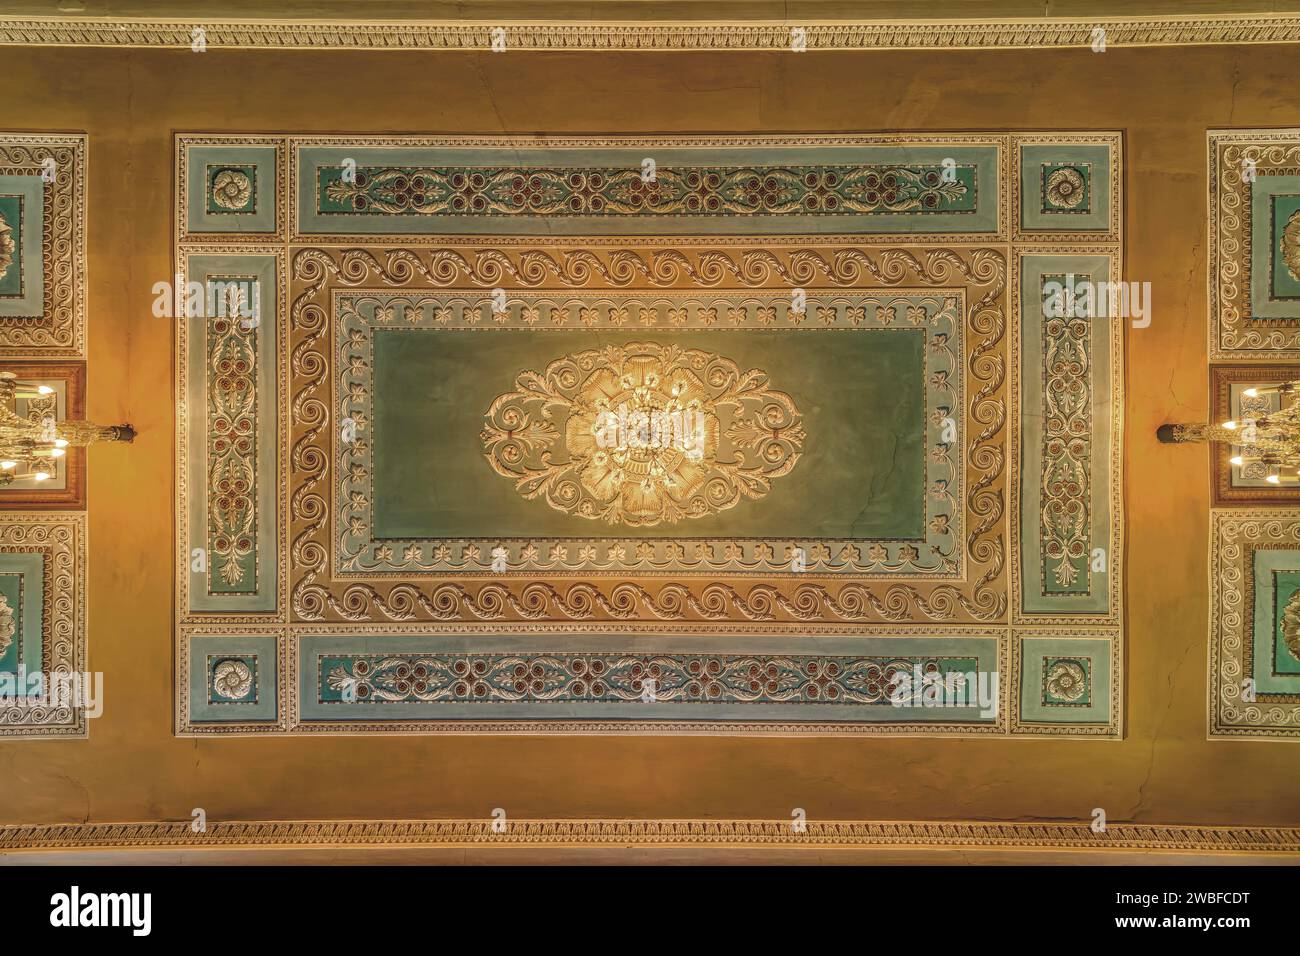 Decorative ceiling with a distinctive chandelier and golden decorations, Schachtrupp Villa, Lost Place, Osterode am Harz, Lower Saxony, Germany Stock Photo